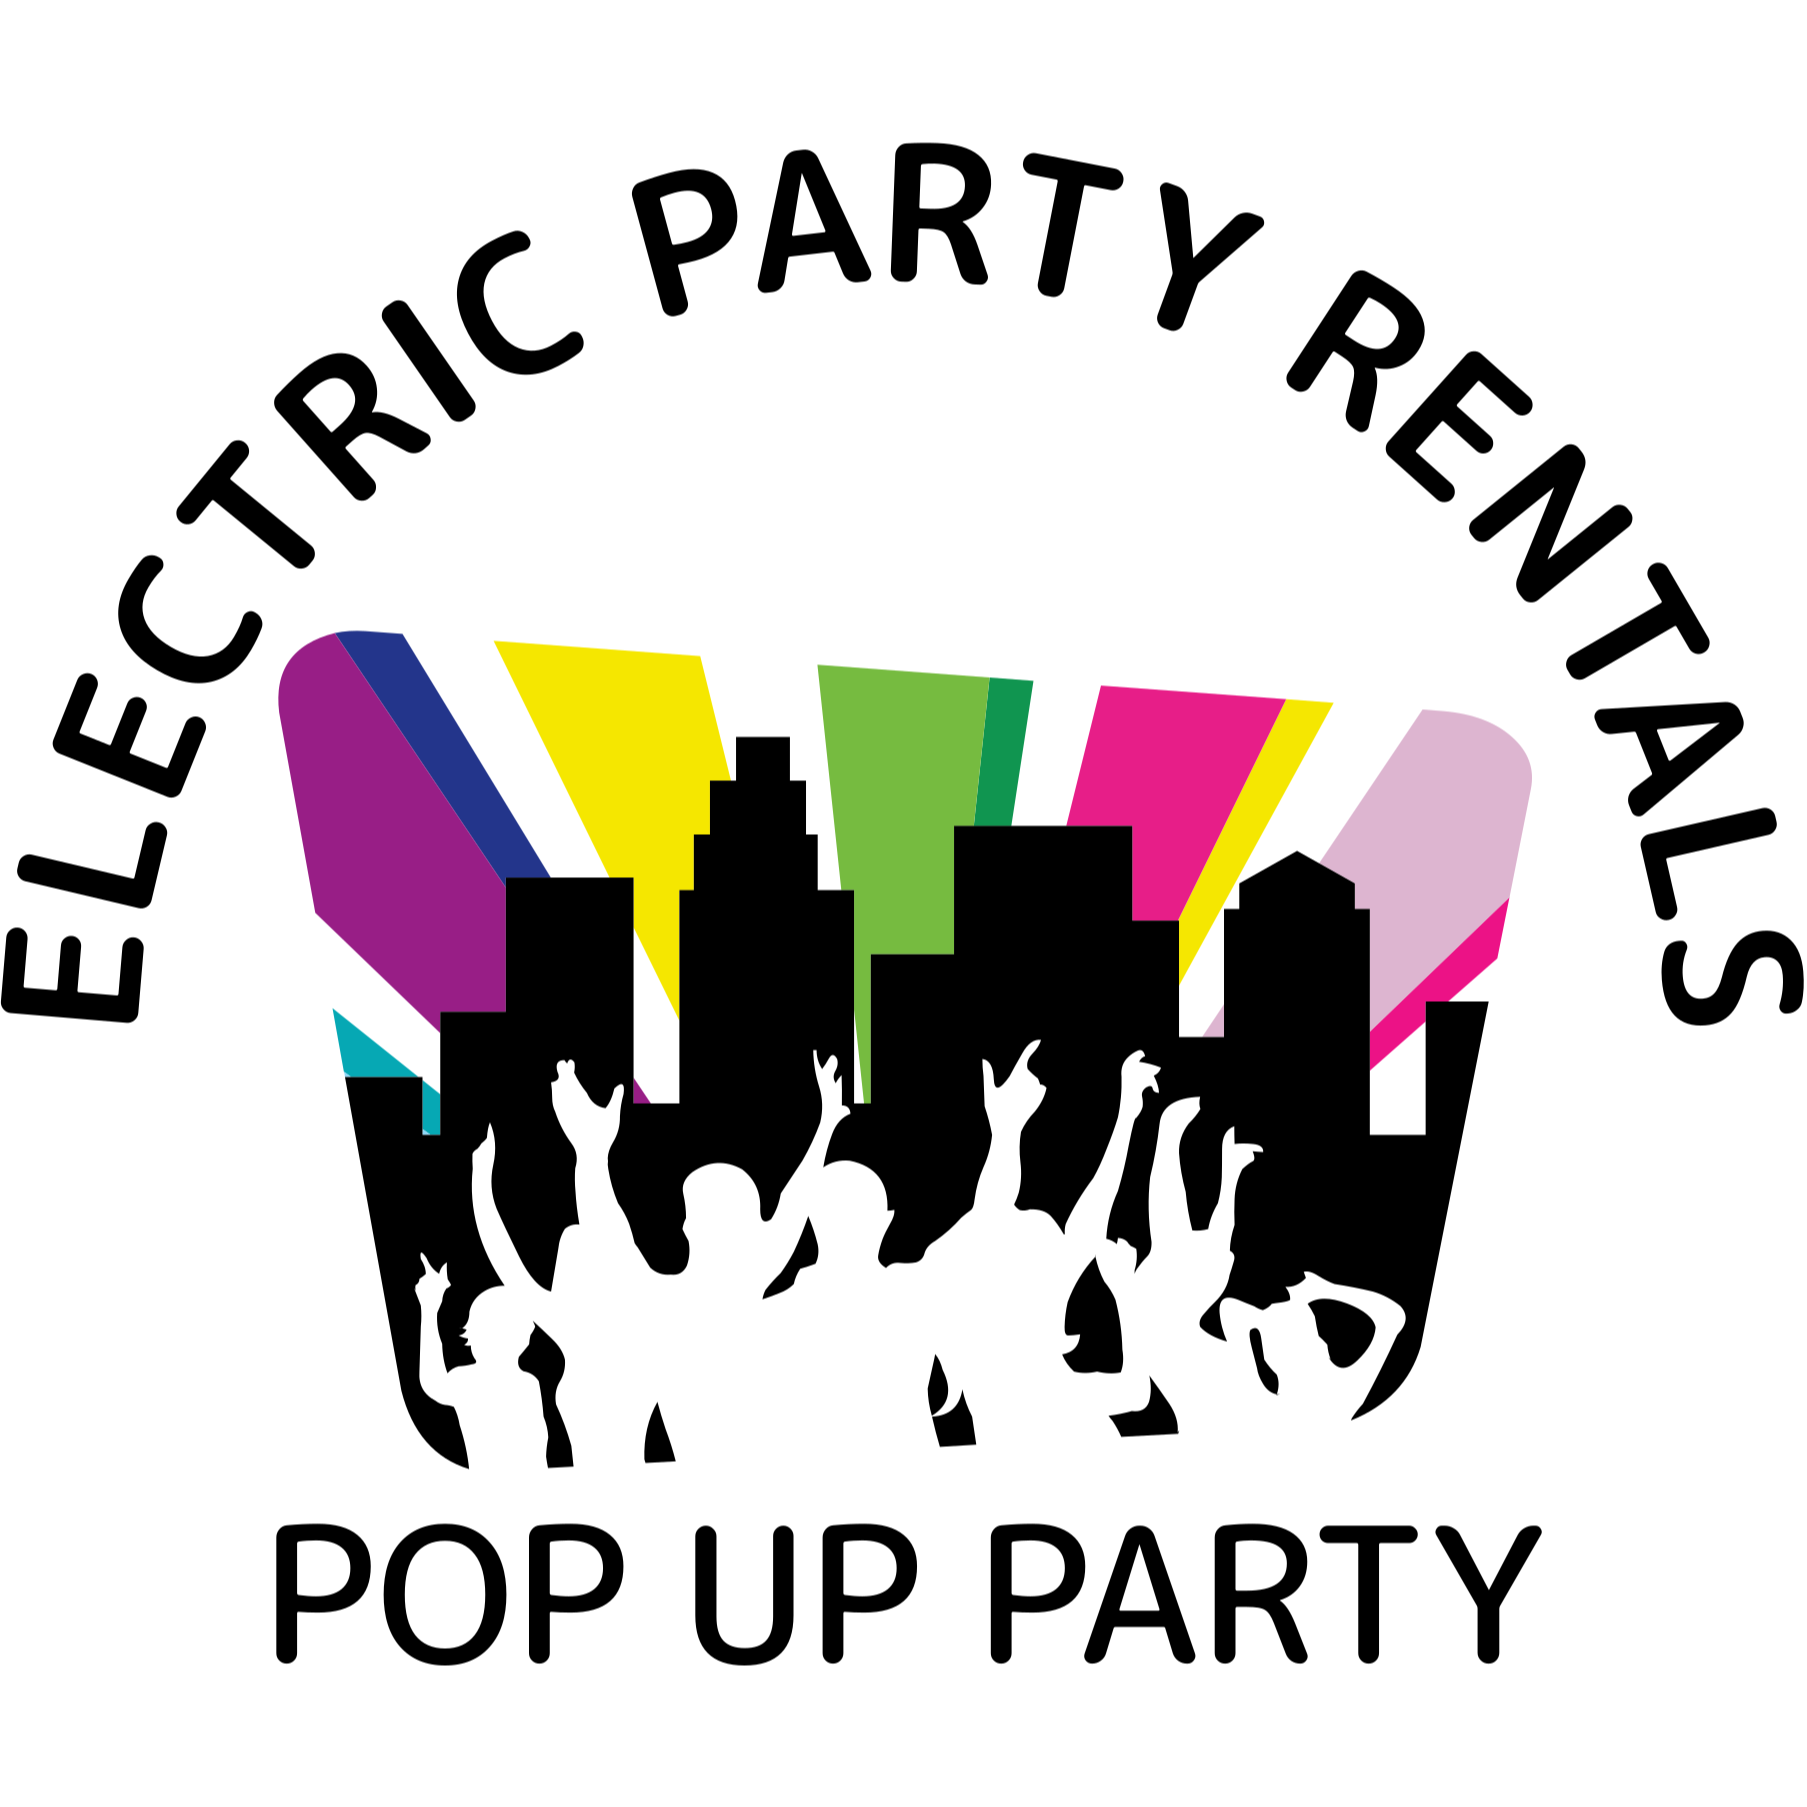 Electric Party Rentals 44 Church View Clerihan Tipperary Co. Tipperary E91 N2V9